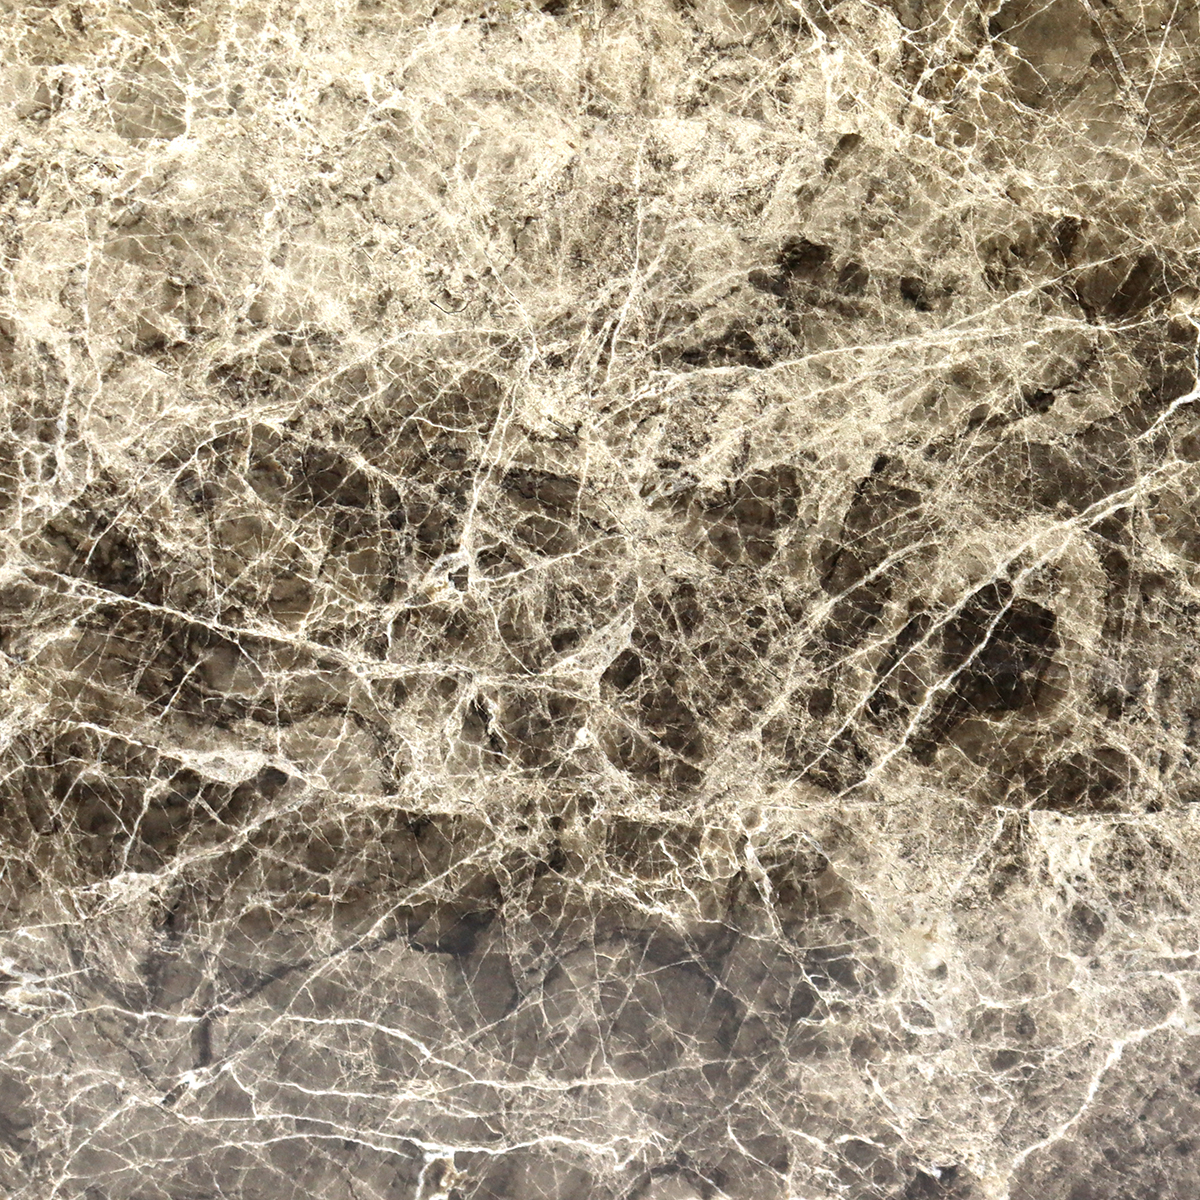 static/products/marbleSlabs/products/MBR27.jpg 